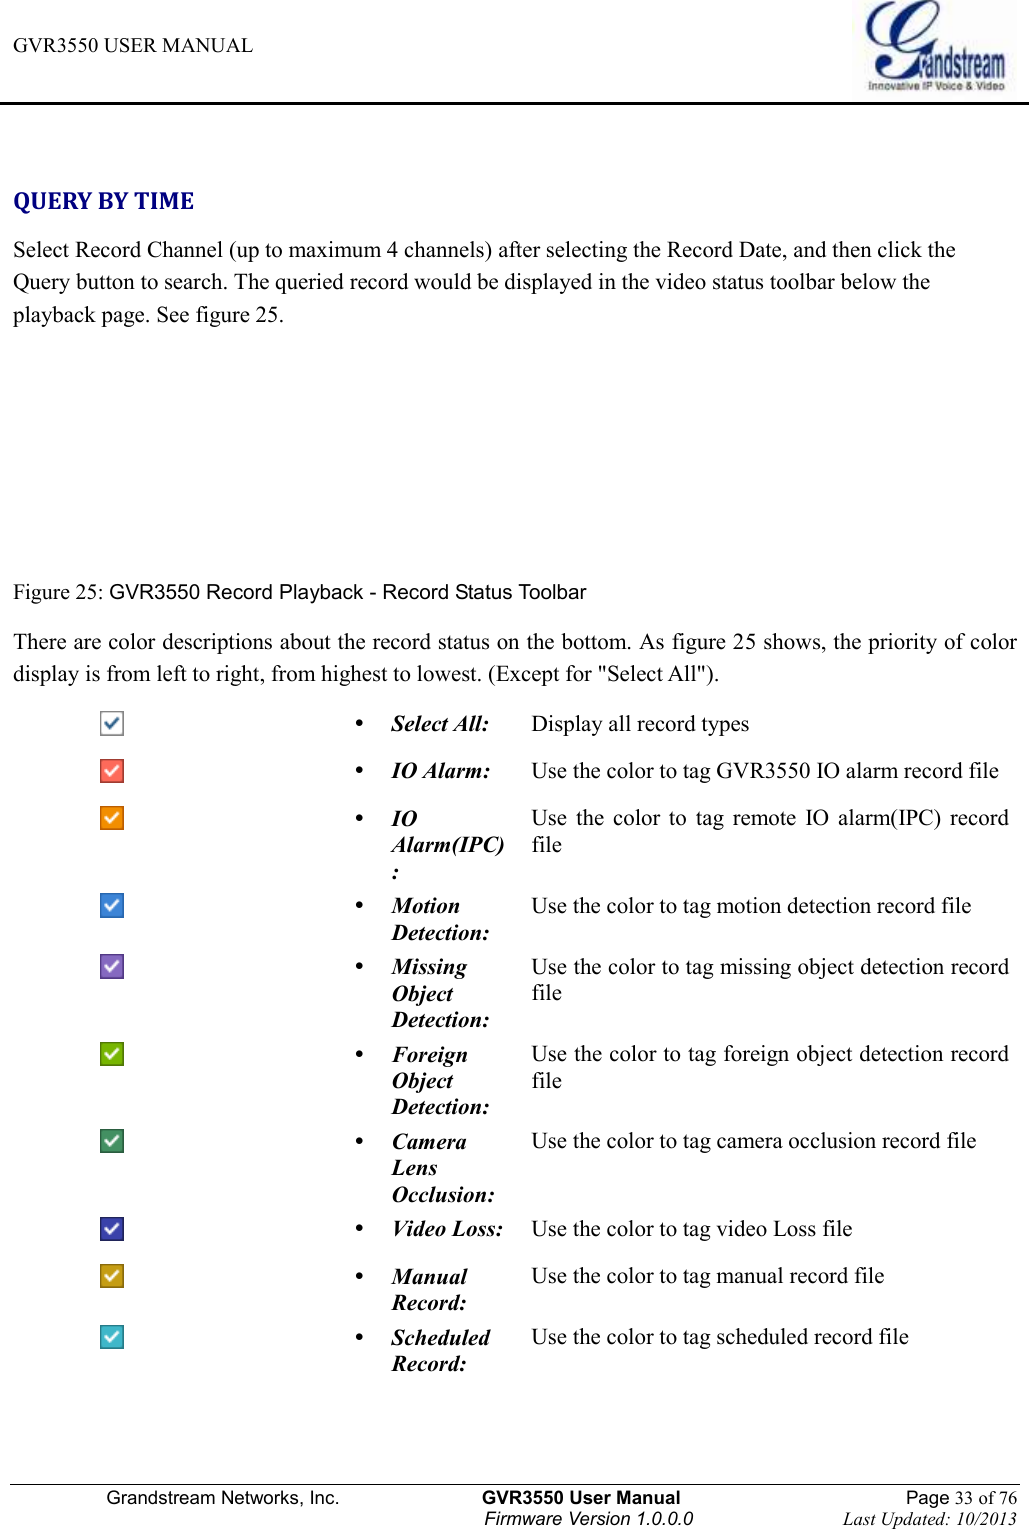 GVR3550 USER MANUAL   Grandstream Networks, Inc.                    GVR3550 User Manual                                                Page 33 of 76 Firmware Version 1.0.0.0                                Last Updated: 10/2013   QUERY BY TIME Select Record Channel (up to maximum 4 channels) after selecting the Record Date, and then click the Query button to search. The queried record would be displayed in the video status toolbar below the playback page. See figure 25.    Figure 25: GVR3550 Record Playback - Record Status Toolbar There are color descriptions about the record status on the bottom. As figure 25 shows, the priority of color display is from left to right, from highest to lowest. (Except for &quot;Select All&quot;).   Select All: Display all record types   IO Alarm: Use the color to tag GVR3550 IO alarm record file   IO Alarm(IPC): Use  the  color  to  tag  remote  IO  alarm(IPC)  record file   Motion Detection: Use the color to tag motion detection record file   Missing Object Detection: Use the color to tag missing object detection record file   Foreign Object Detection: Use the color to tag foreign object detection record file   Camera   Lens Occlusion: Use the color to tag camera occlusion record file   Video Loss: Use the color to tag video Loss file   Manual Record: Use the color to tag manual record file   Scheduled Record: Use the color to tag scheduled record file  